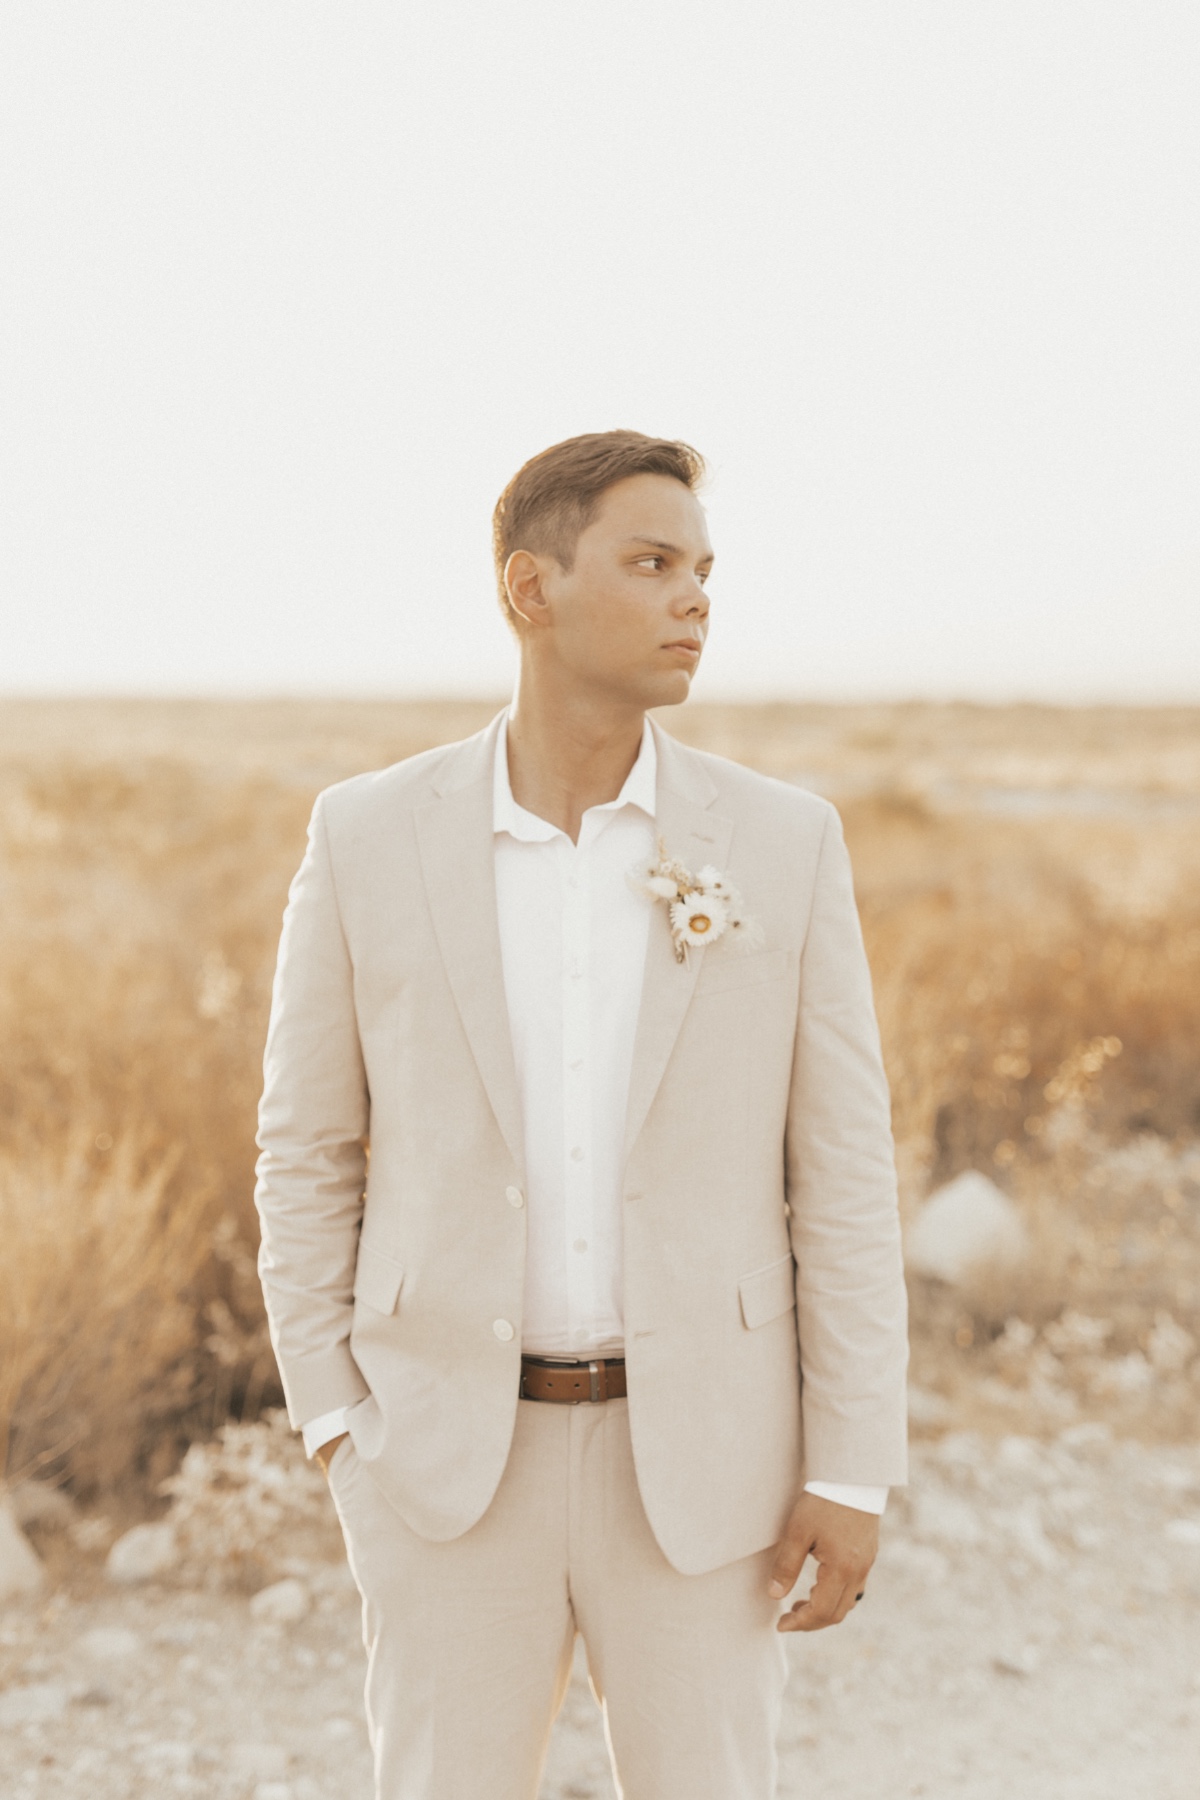 A City-wide Blackout Couldn't Stop This Sunny Desert Wedding